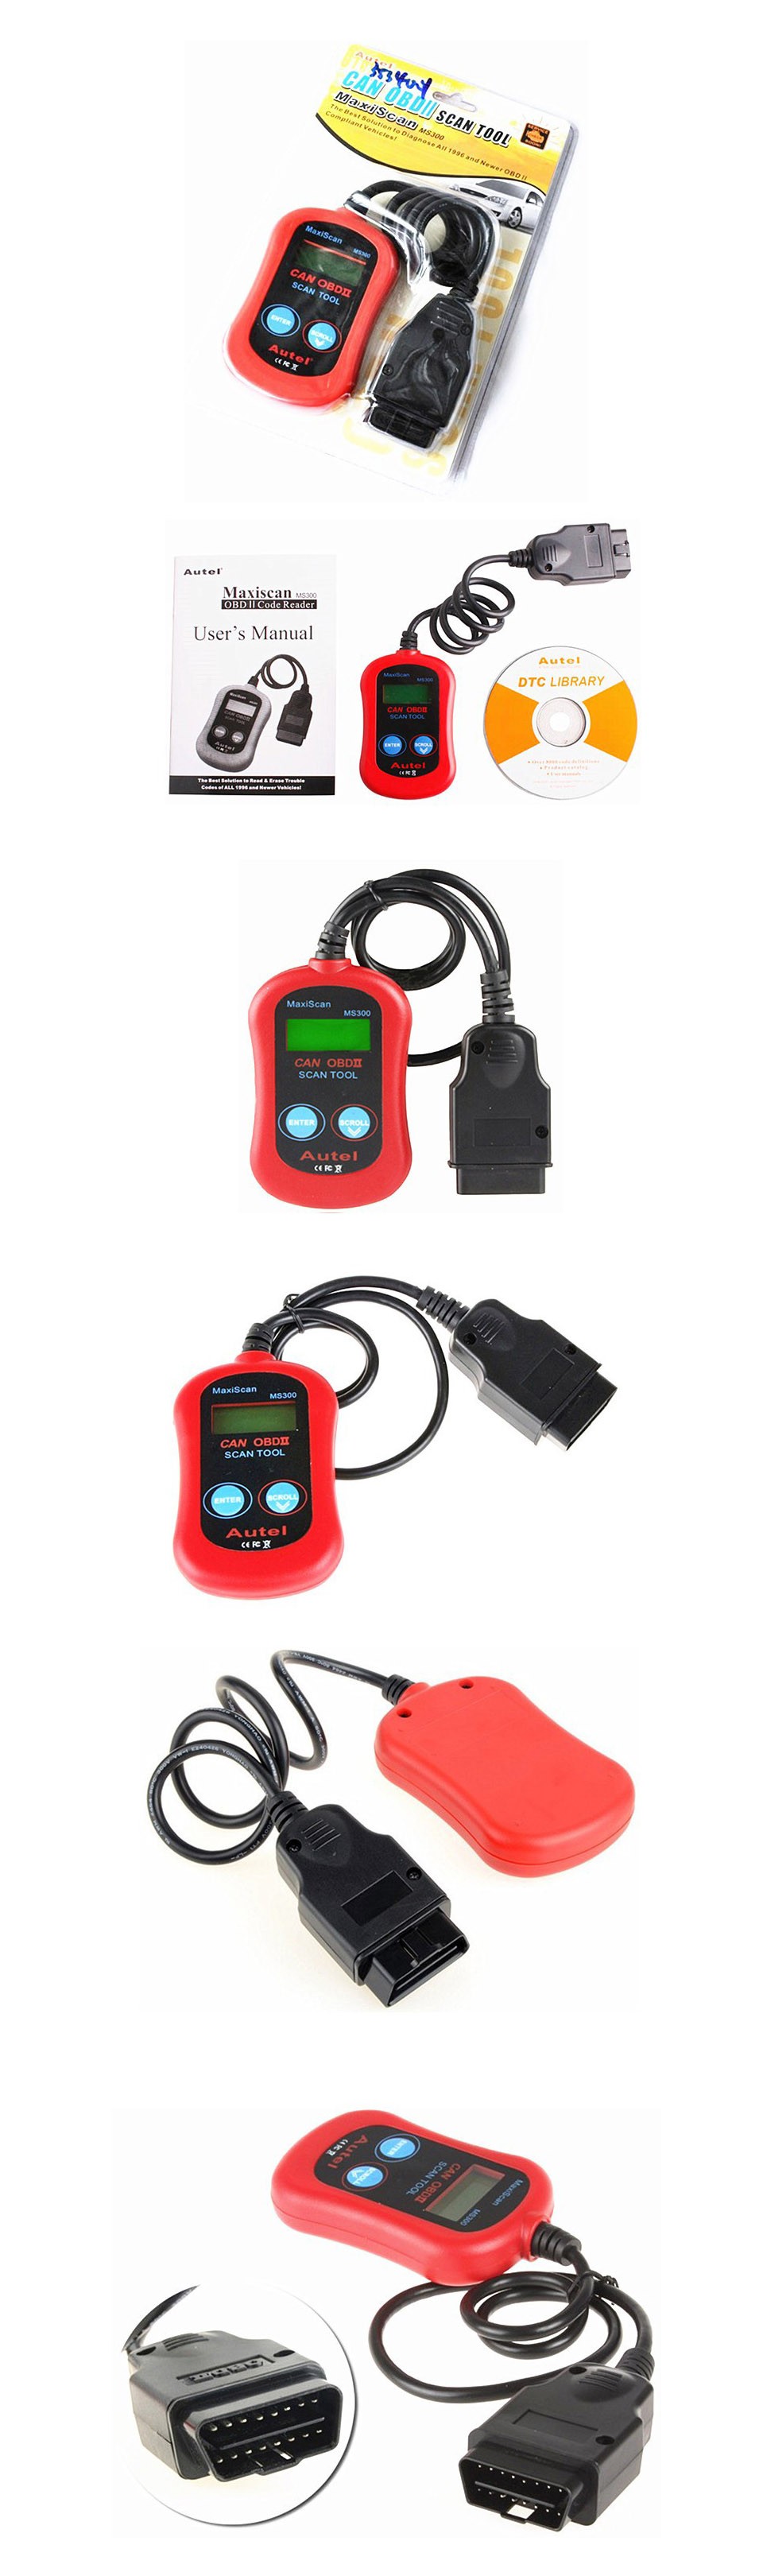 UNIVERSAL-ALL-Auto-reader-code-scanner-MS300-diagnostic-tool-OBD-2-scanner-MaxiScan-MS-300-In-1